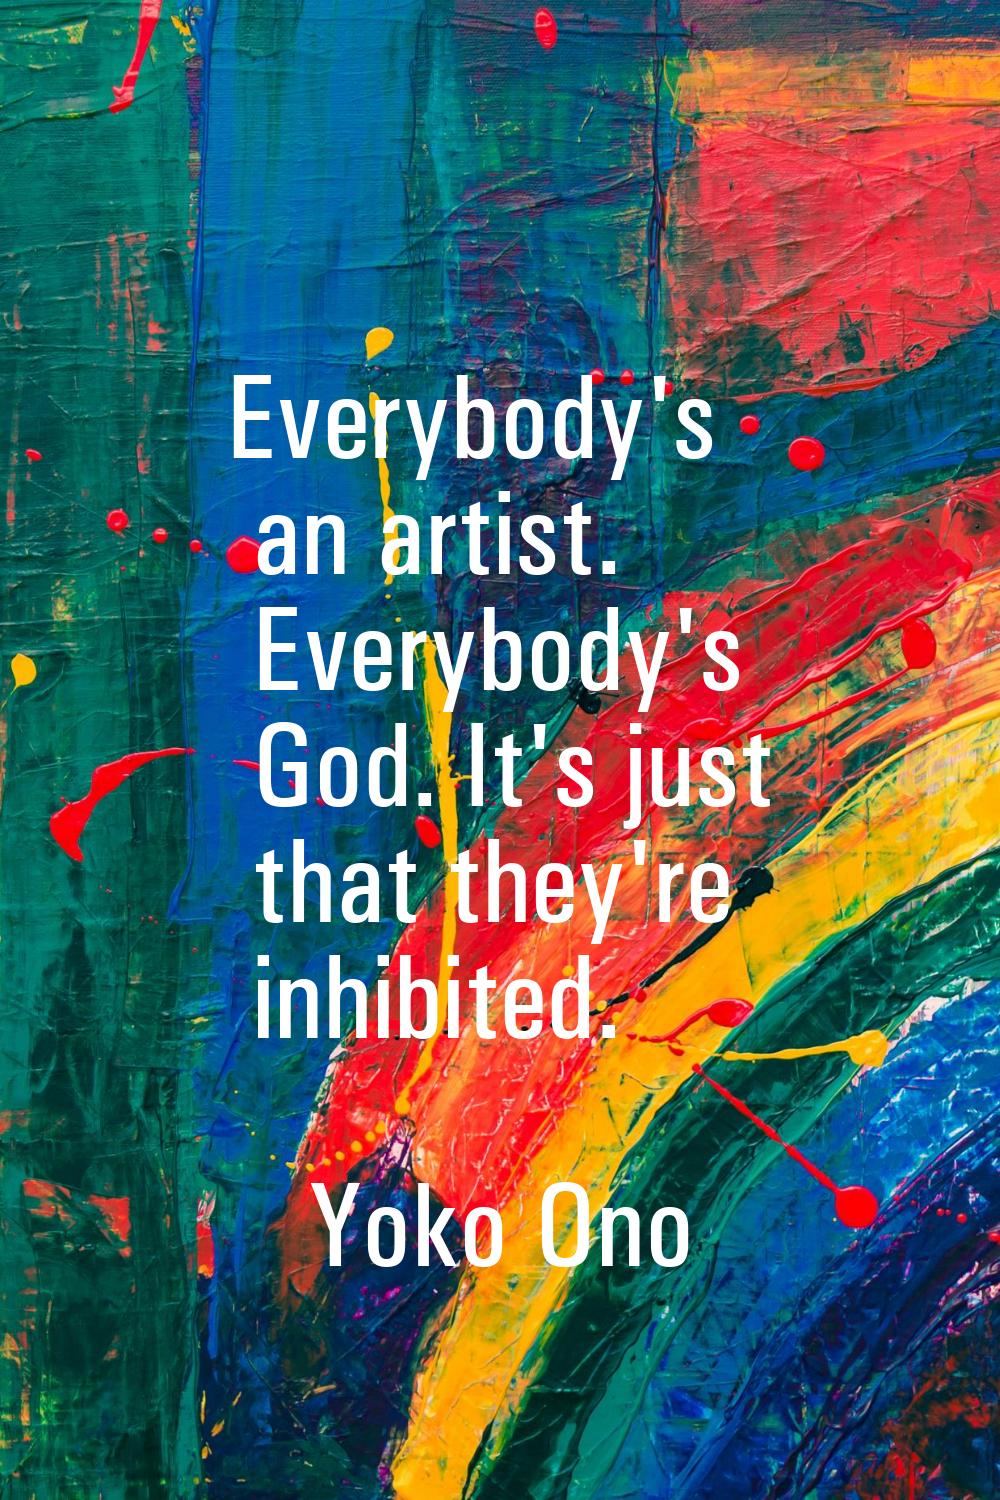 Everybody's an artist. Everybody's God. It's just that they're inhibited.